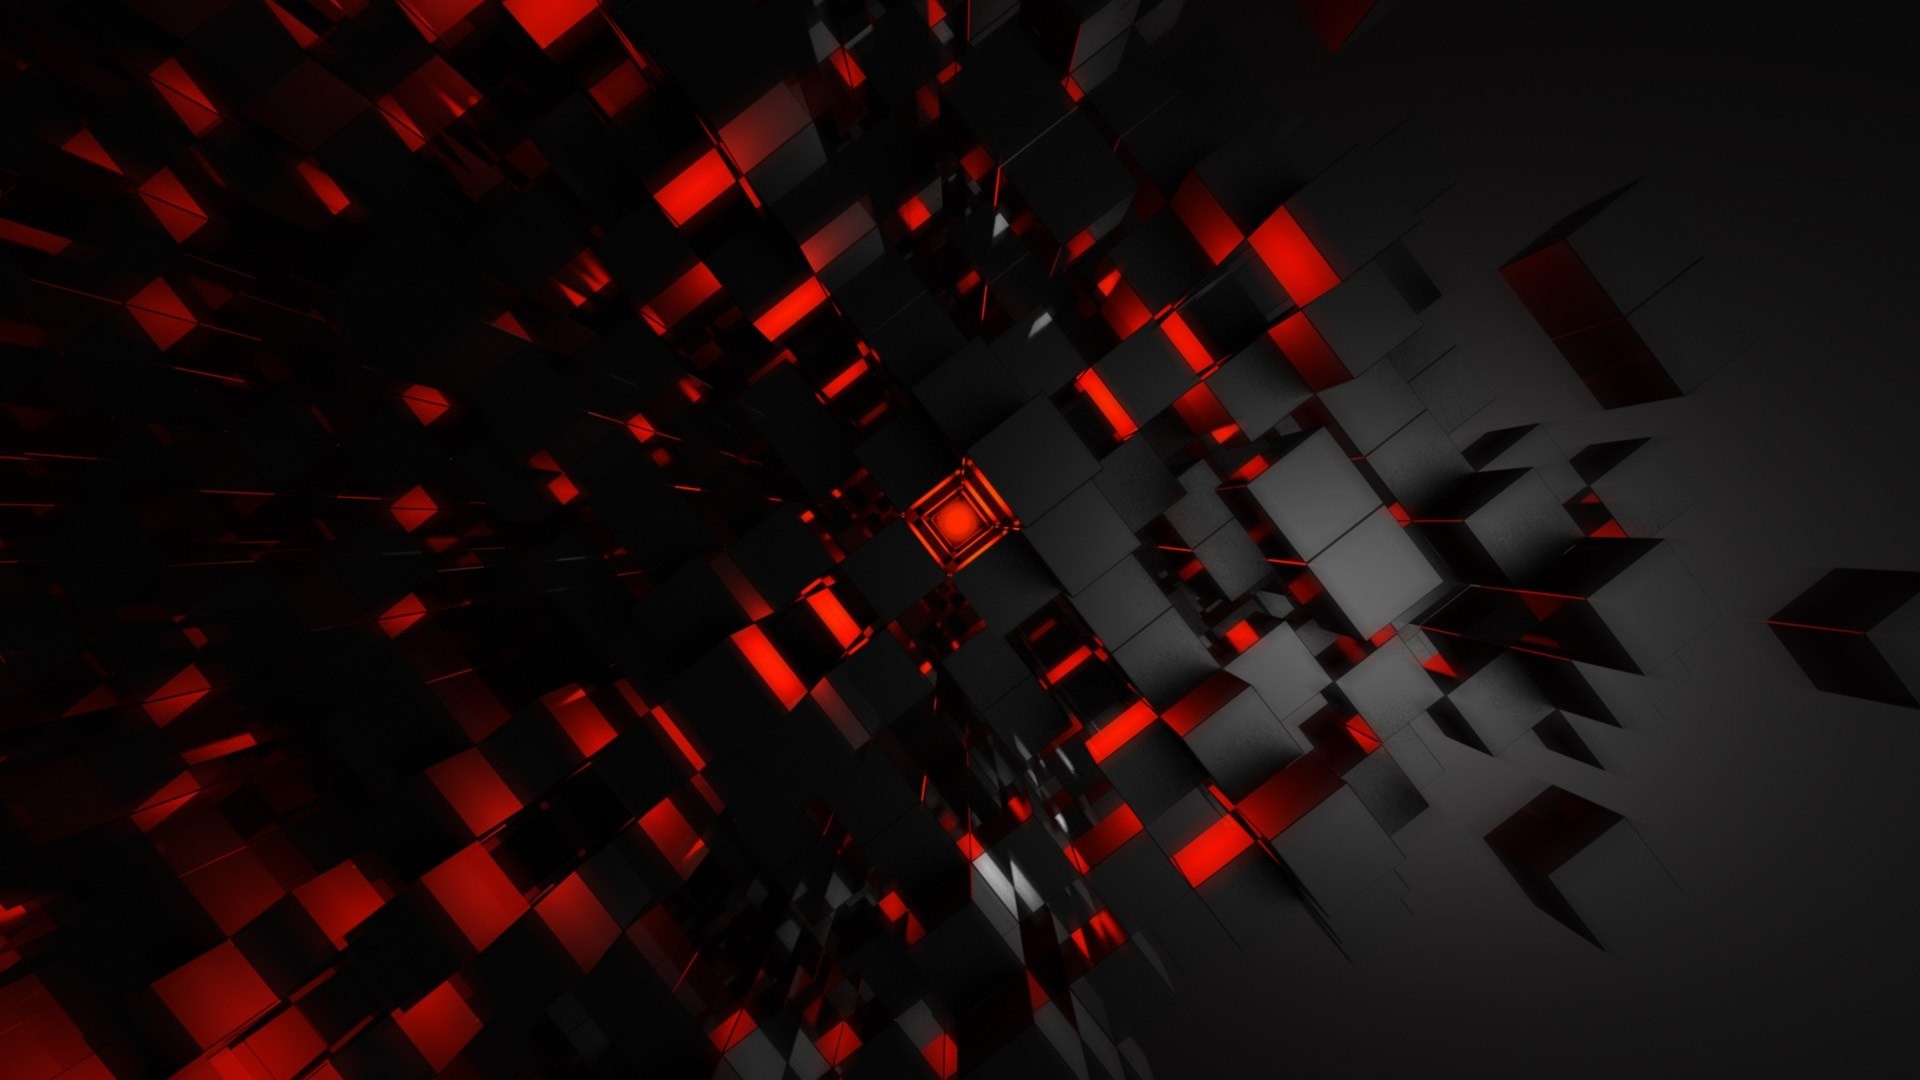 1920x1080 Hd Wallpapers  | Free2IMG.com Â· Red WallpaperRed And Black ...